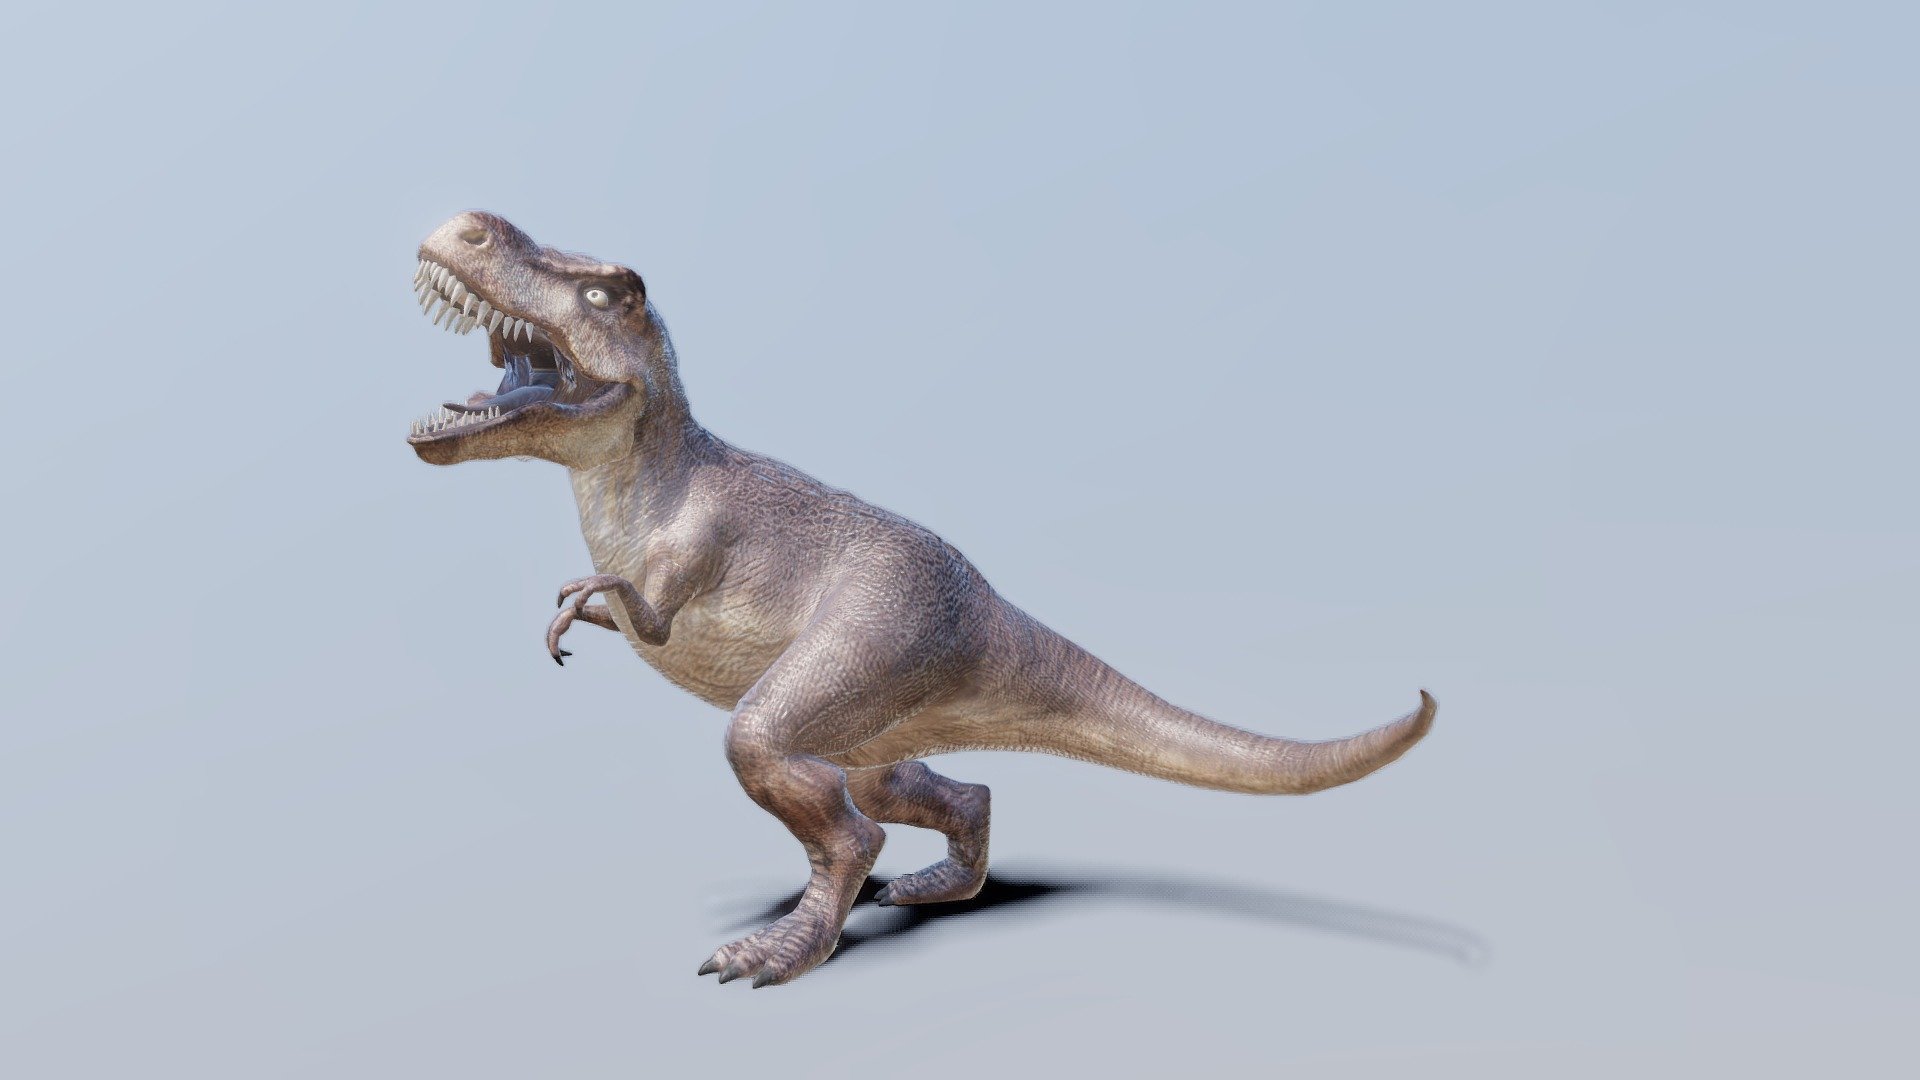 Behold the king of the dinosaurs the one who ruled the earth. The tyrannosaurus rex is a most aggressive dinosaur in the jurassic times of the year. To tame this giant beast, theres no way because he|she is always hungry 3d model